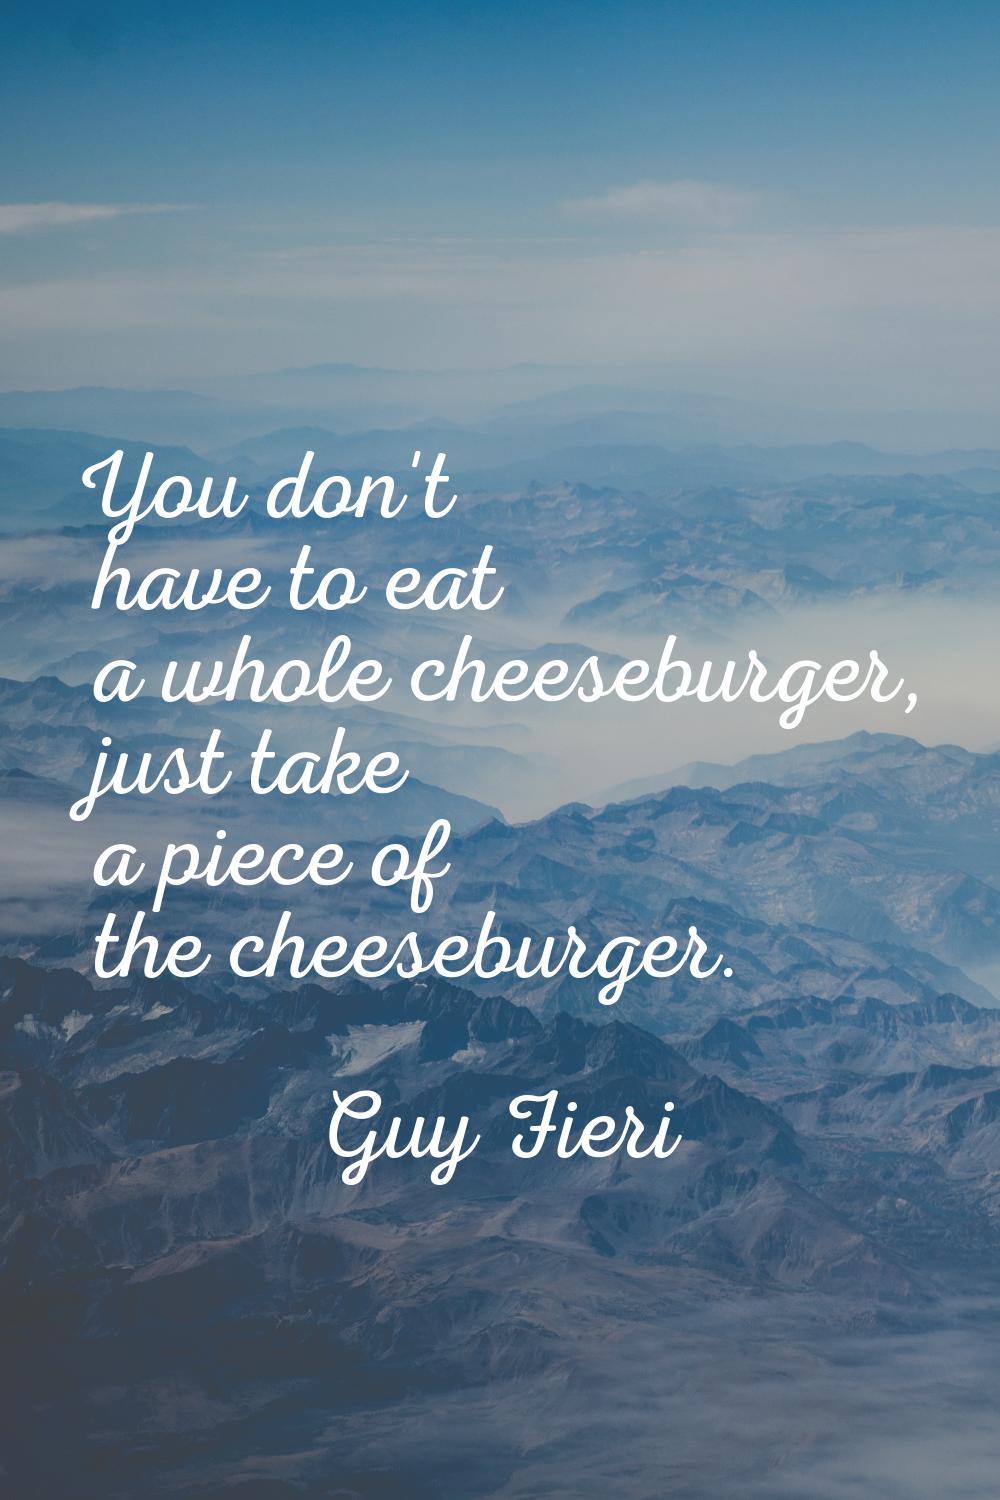 You don't have to eat a whole cheeseburger, just take a piece of the cheeseburger.